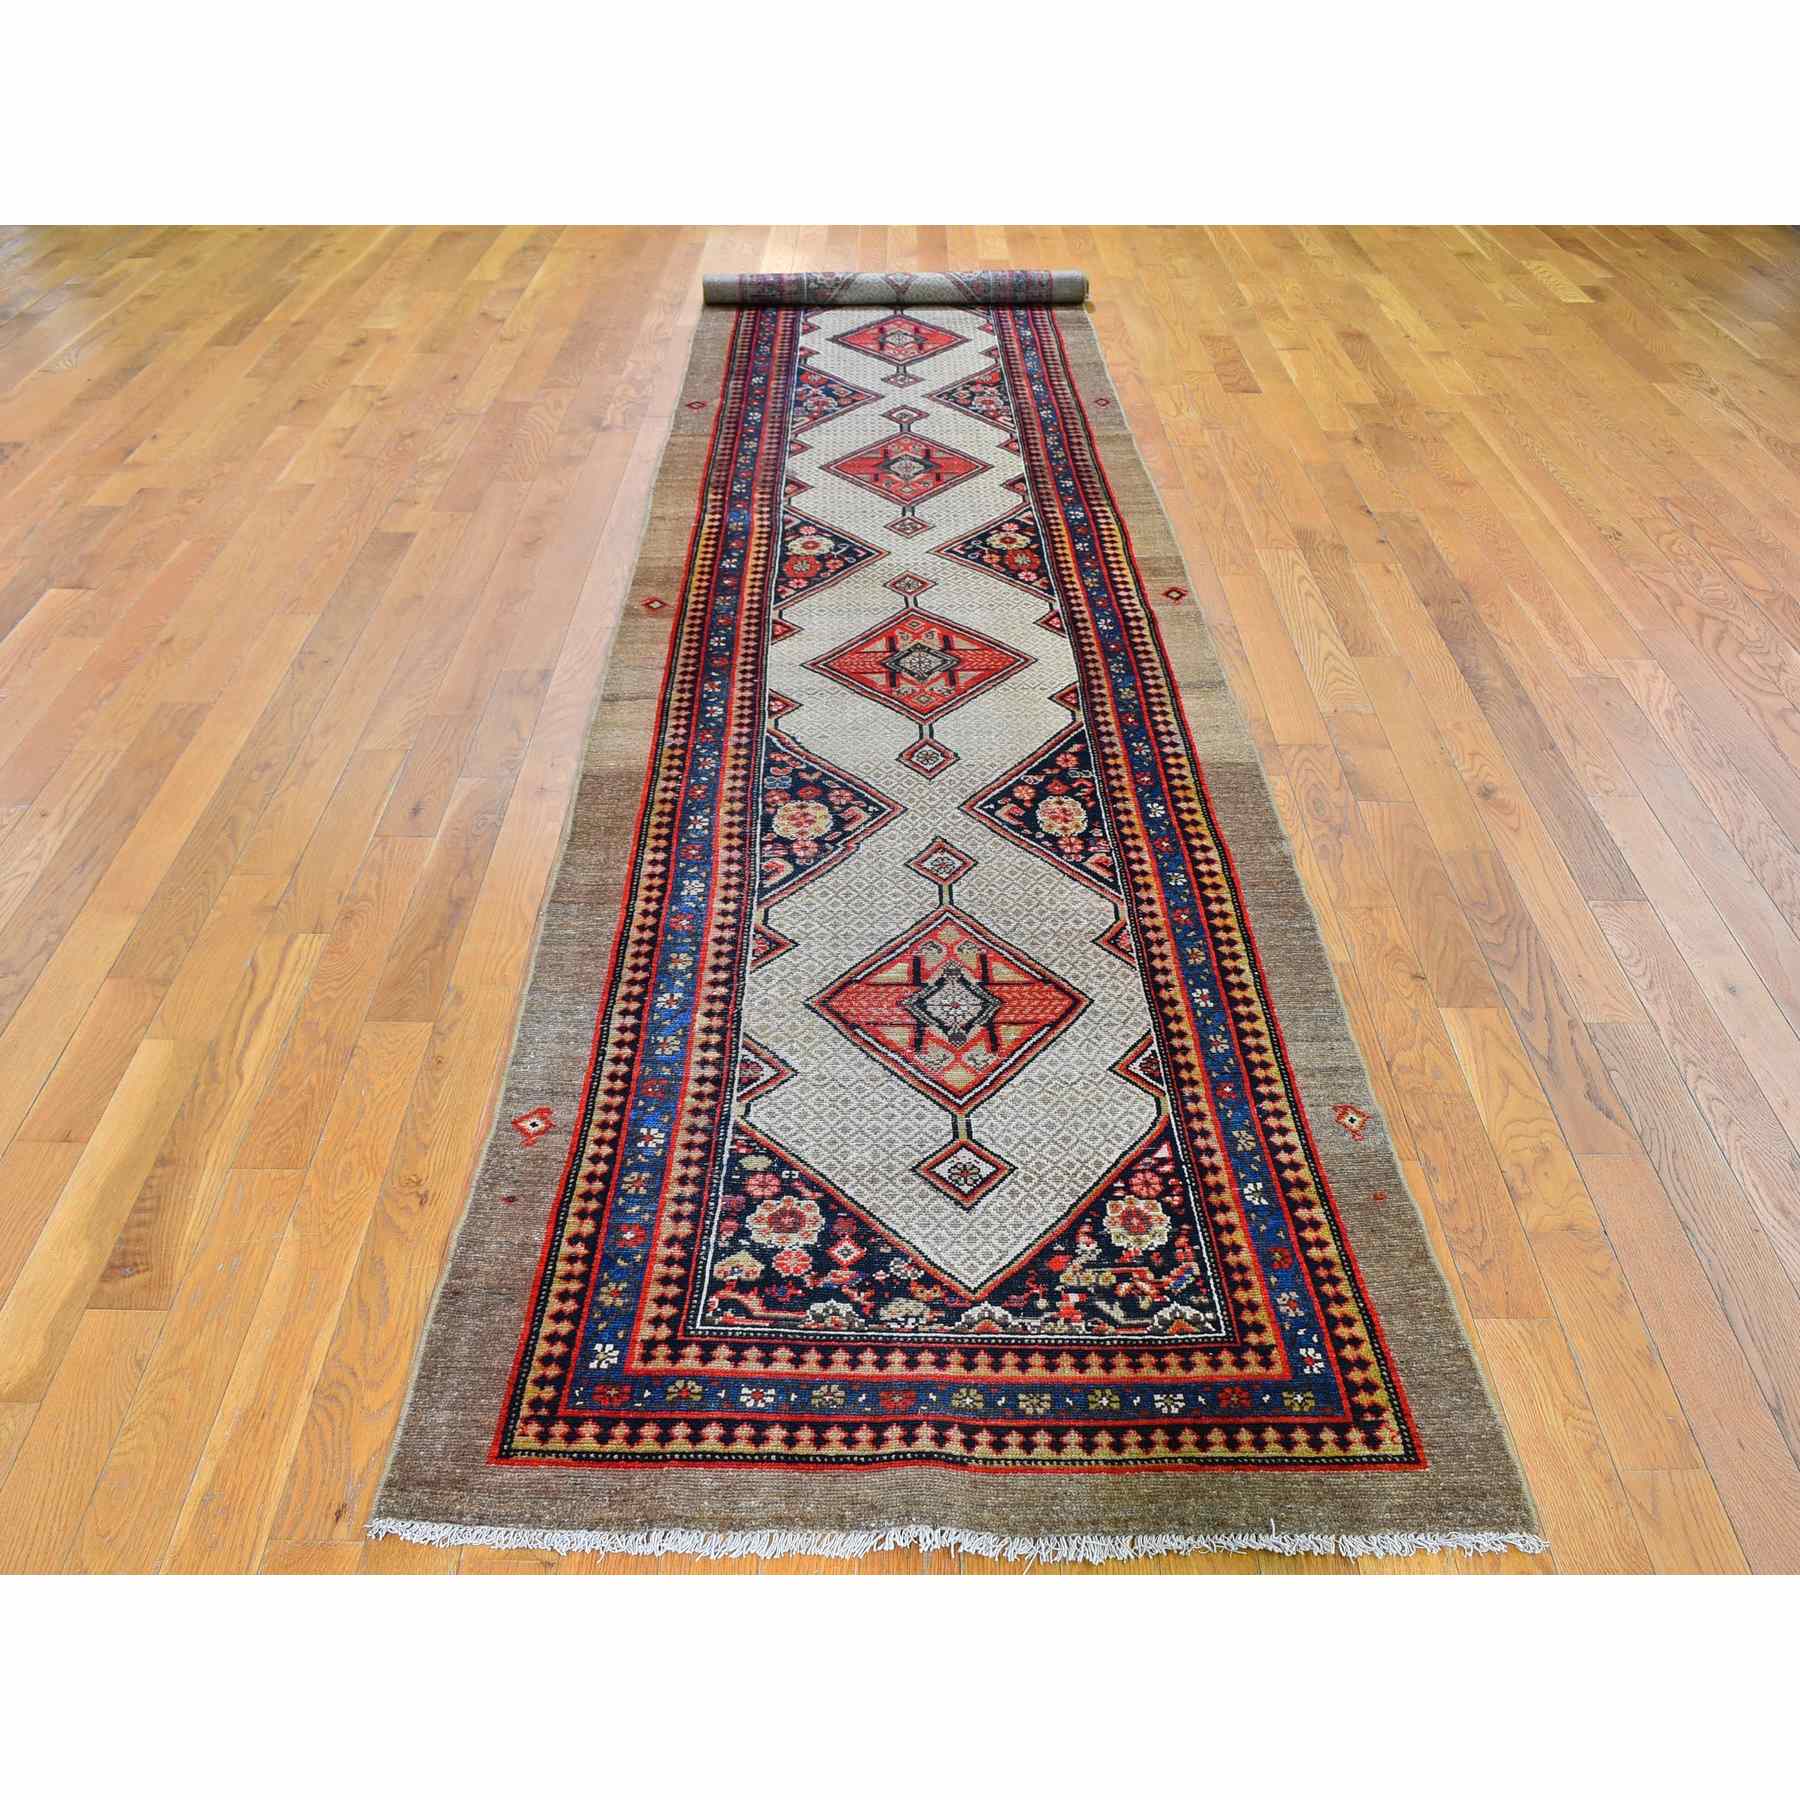 Antique-Hand-Knotted-Rug-297555